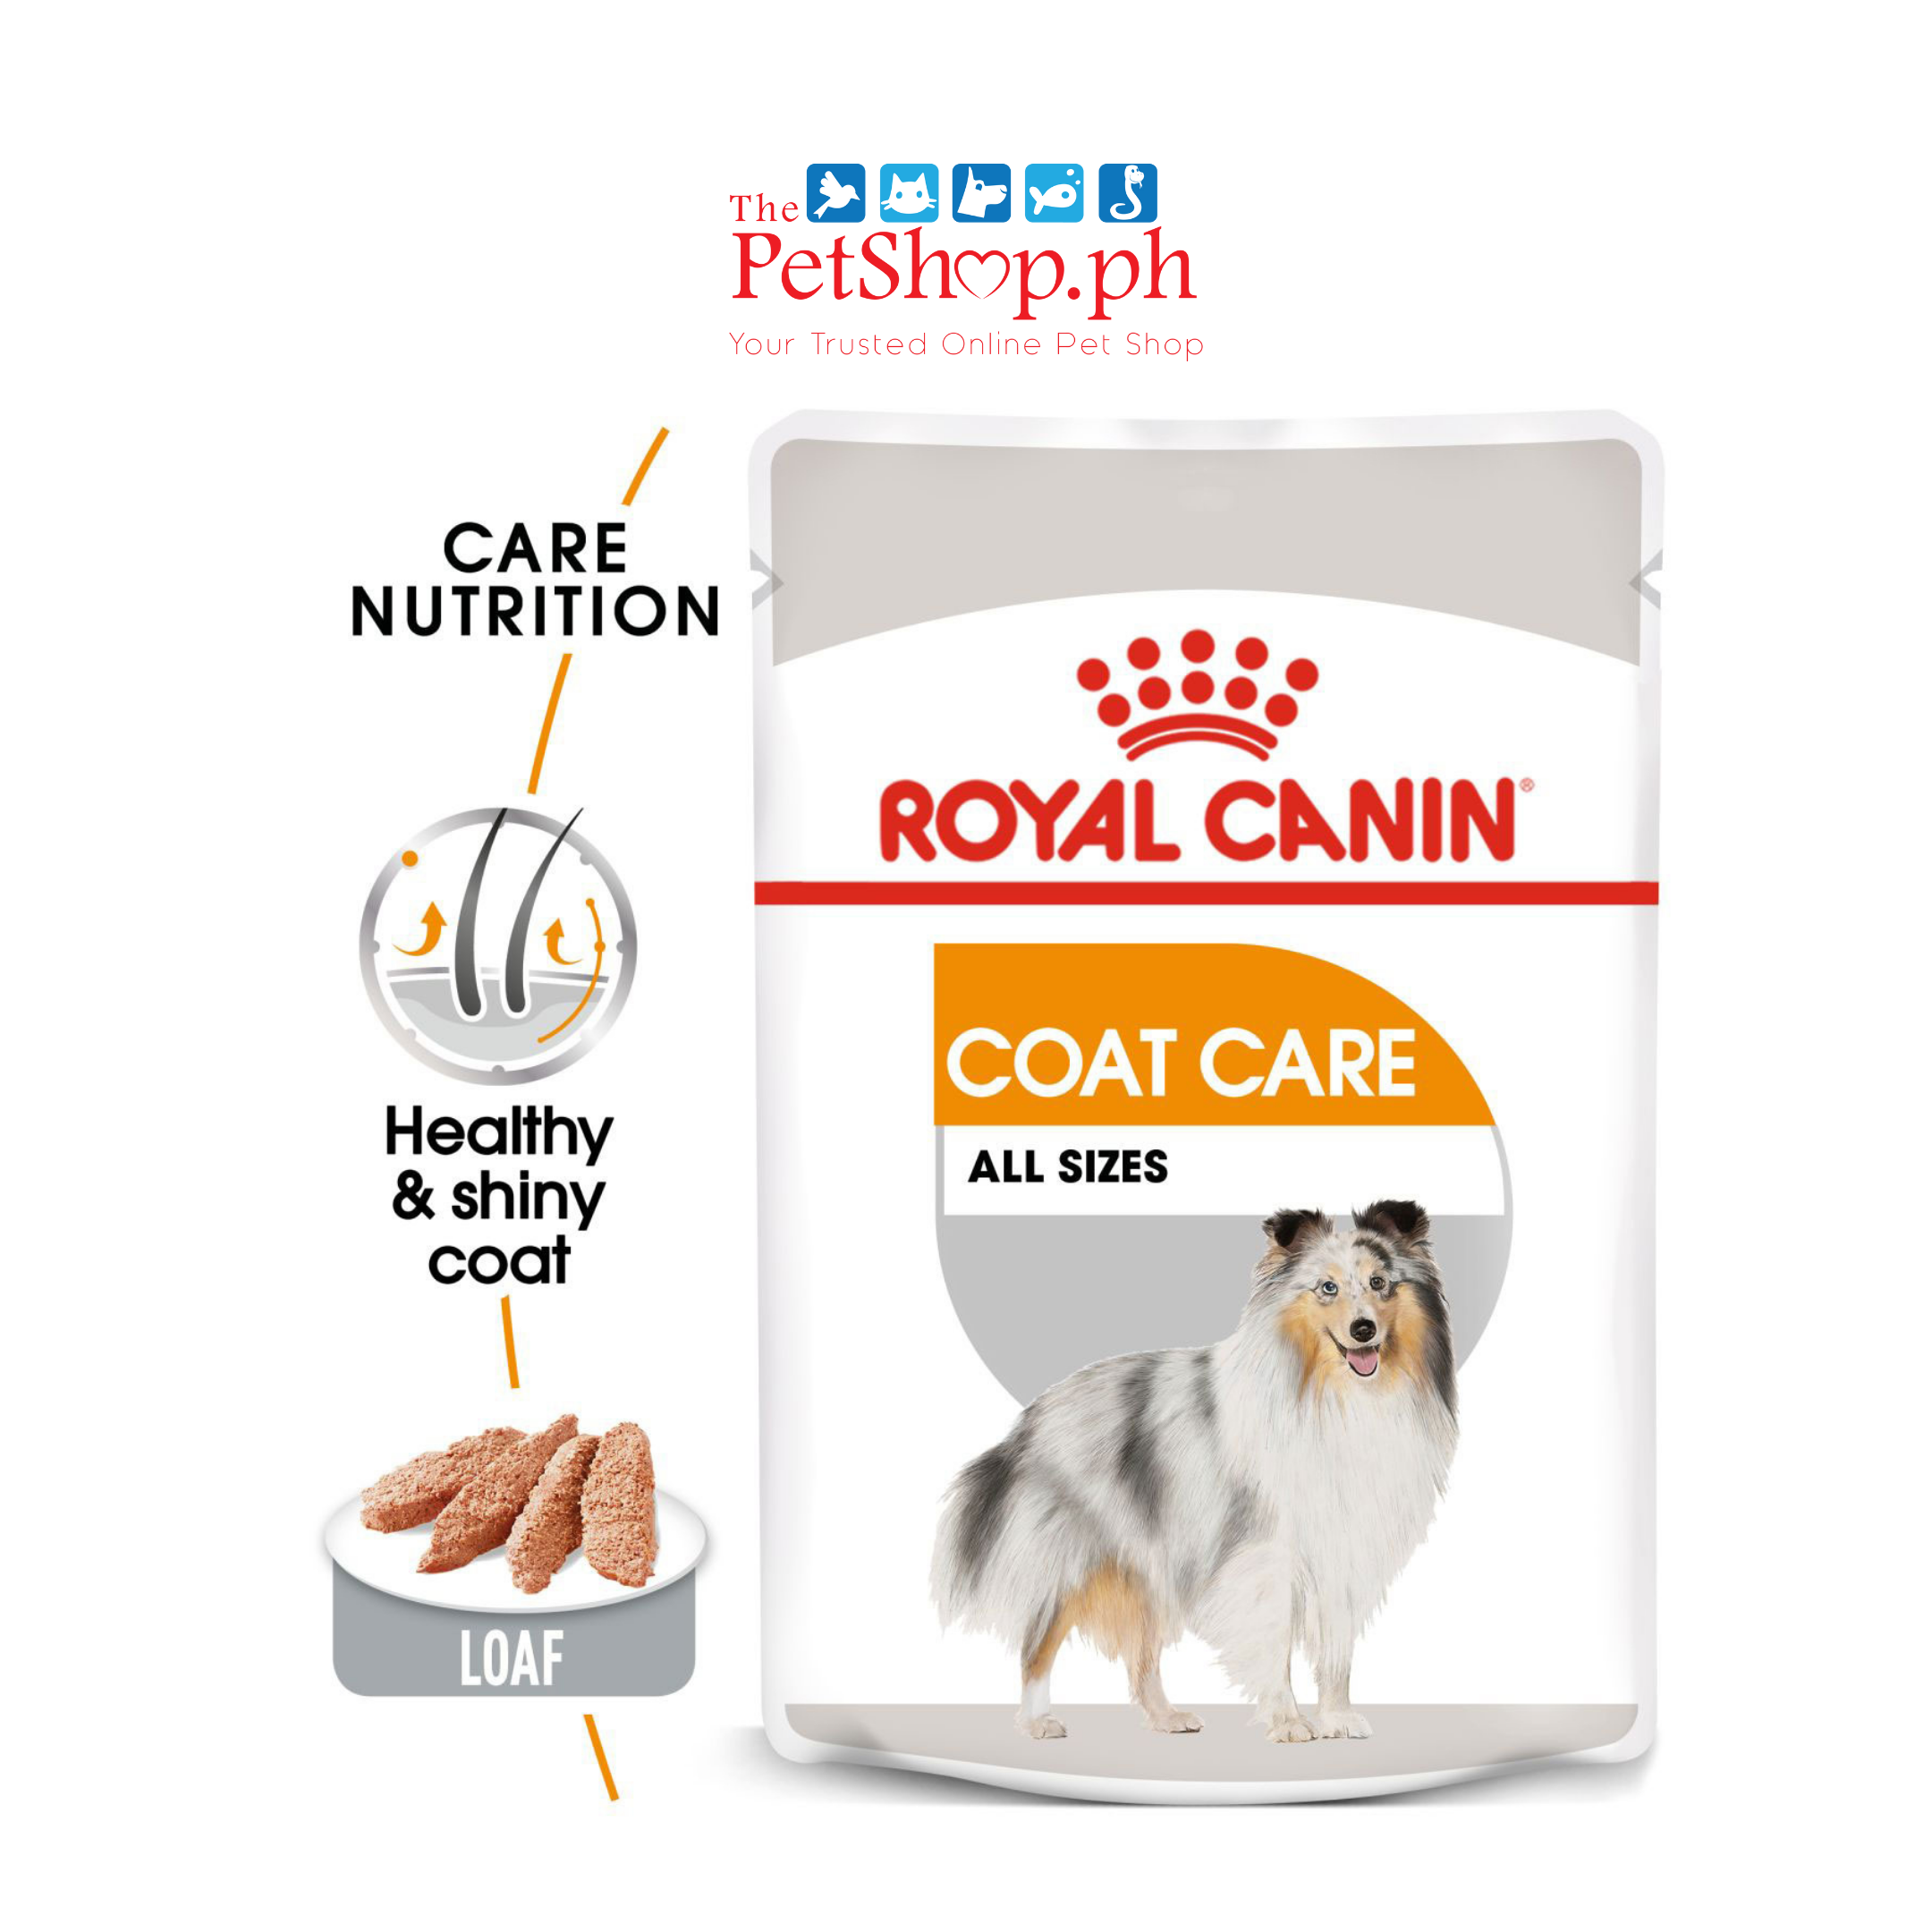 Royal Canin Coat Care  85g Set of 12 Adult Wet Dog Food -Canine Care Nutrition  For adult dogs over 10 months old - Dogs with dull and rough hair. All sizes.  HEALTHY & SHINY COAT Precisely balanced nutritional formula which support a full & rich hair growth for coat vigor and shine.  CANINE CARE NUTRITION PROGRAMME Providing a healthy & balanced nutrition with the perfect combination of our dry & wet formulas.